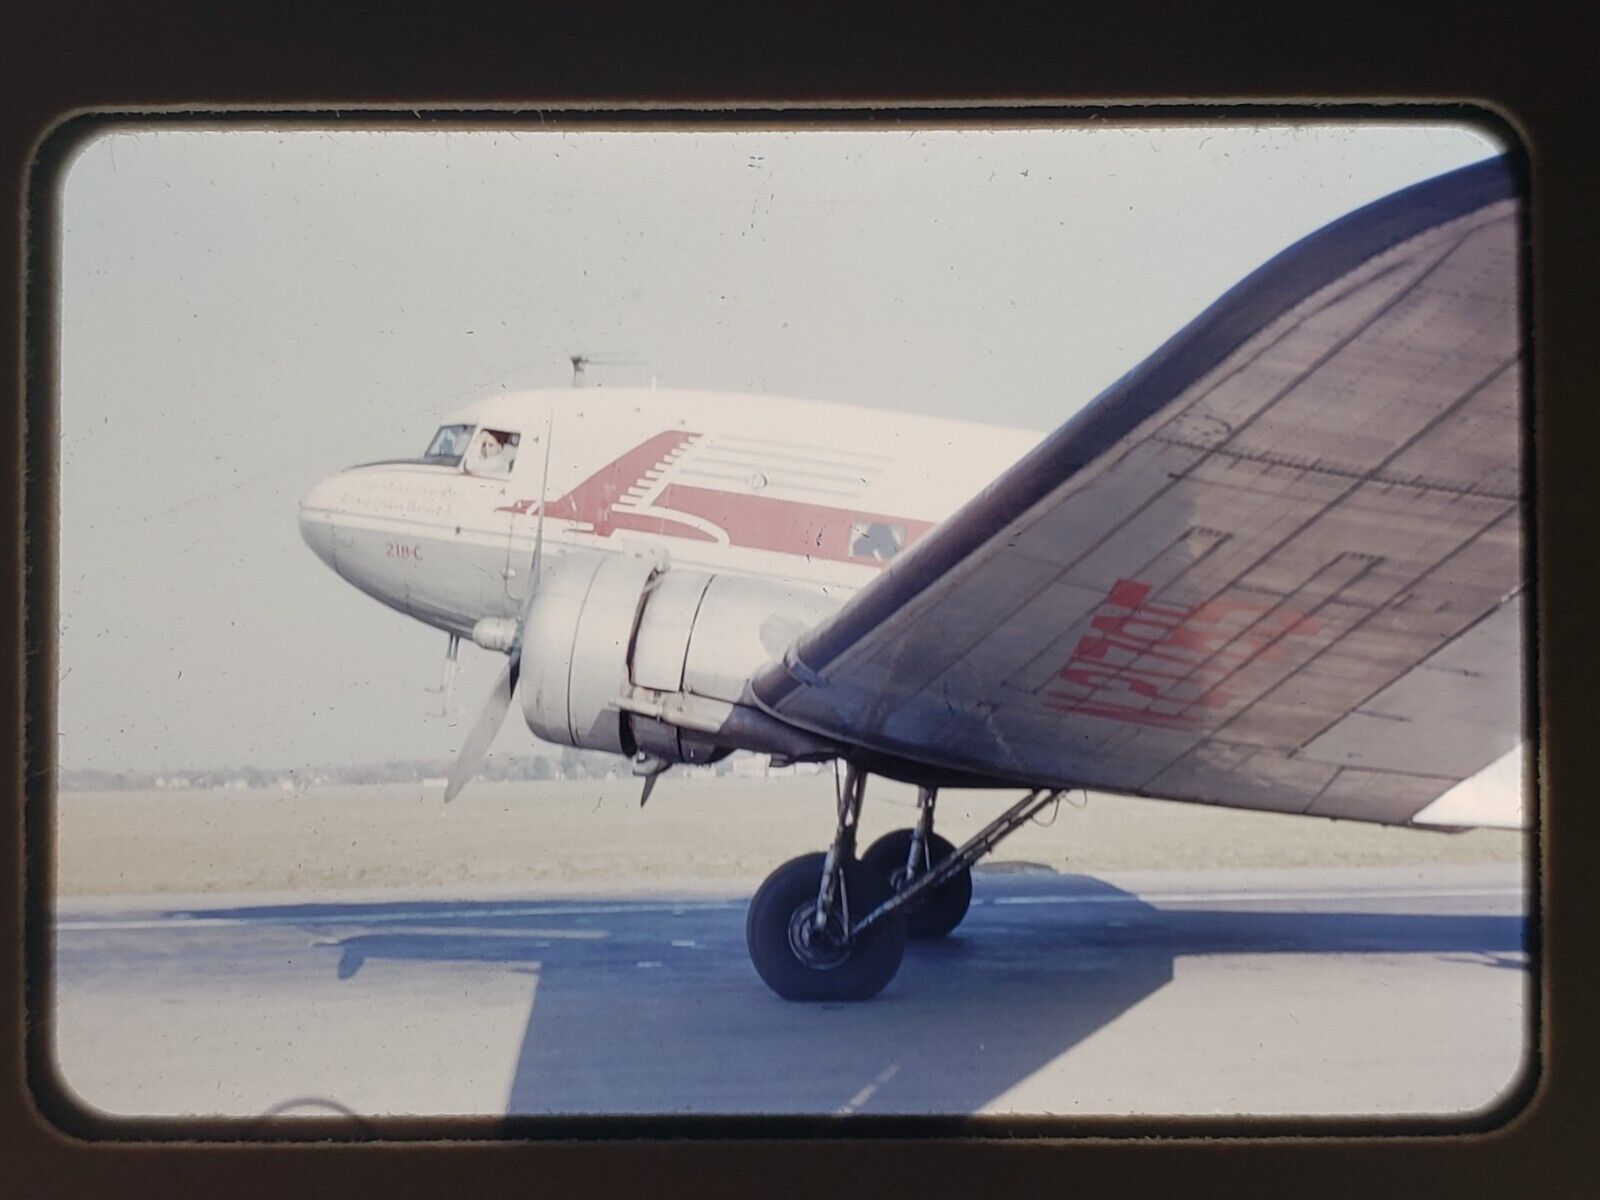 Vtg 1950s 35mm Slide - Capital Airlines Douglas DC-3 Airplane Side View